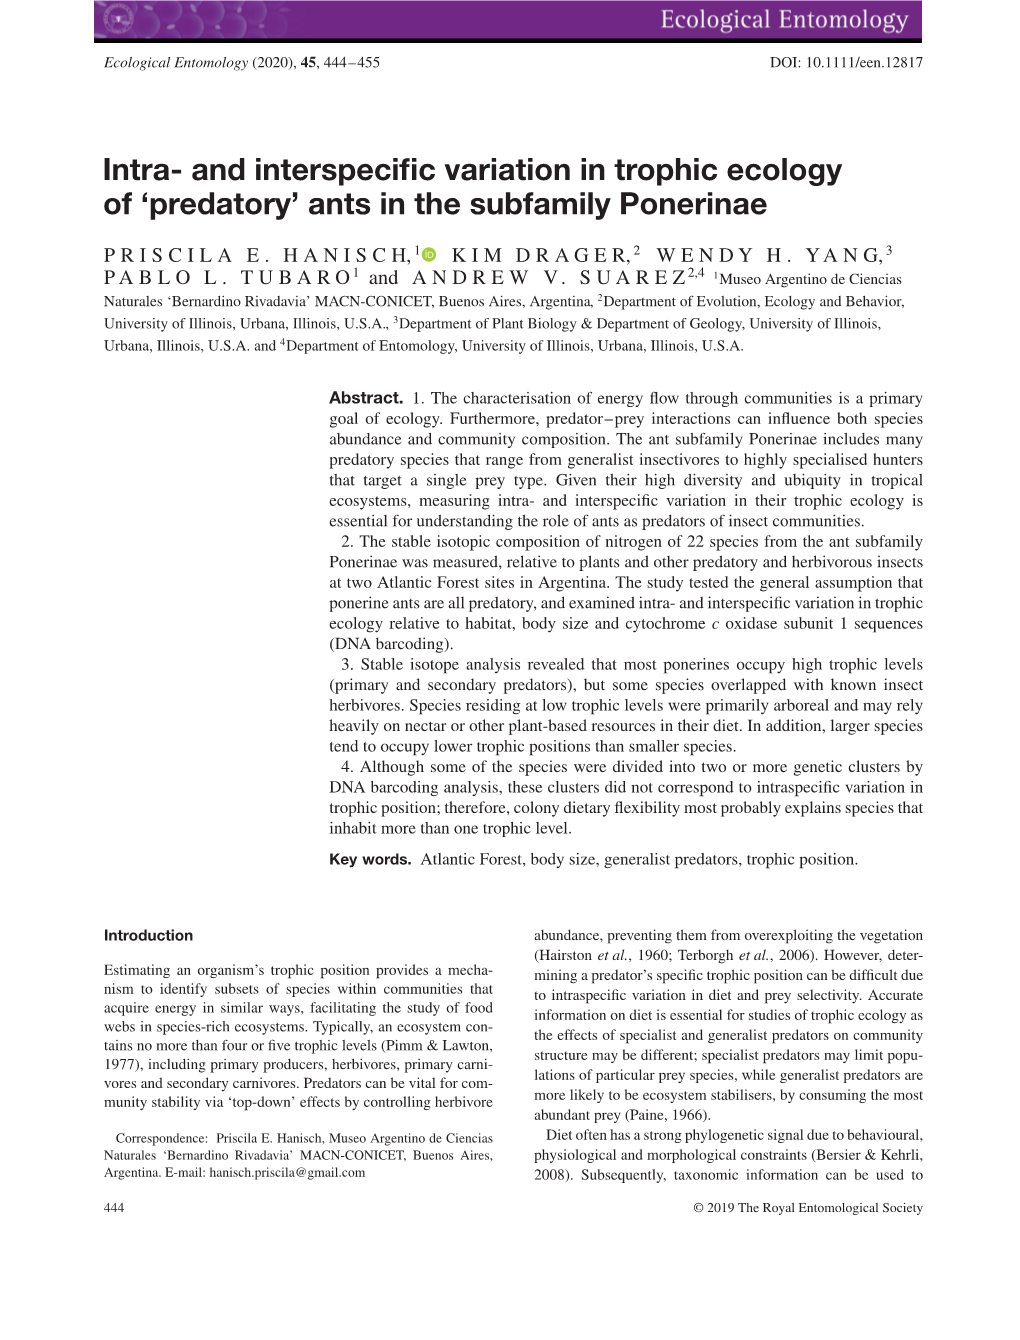 Intra‐ and Interspecific Variation in Trophic Ecology of 'Predatory' Ants in the Subfamily Ponerinae